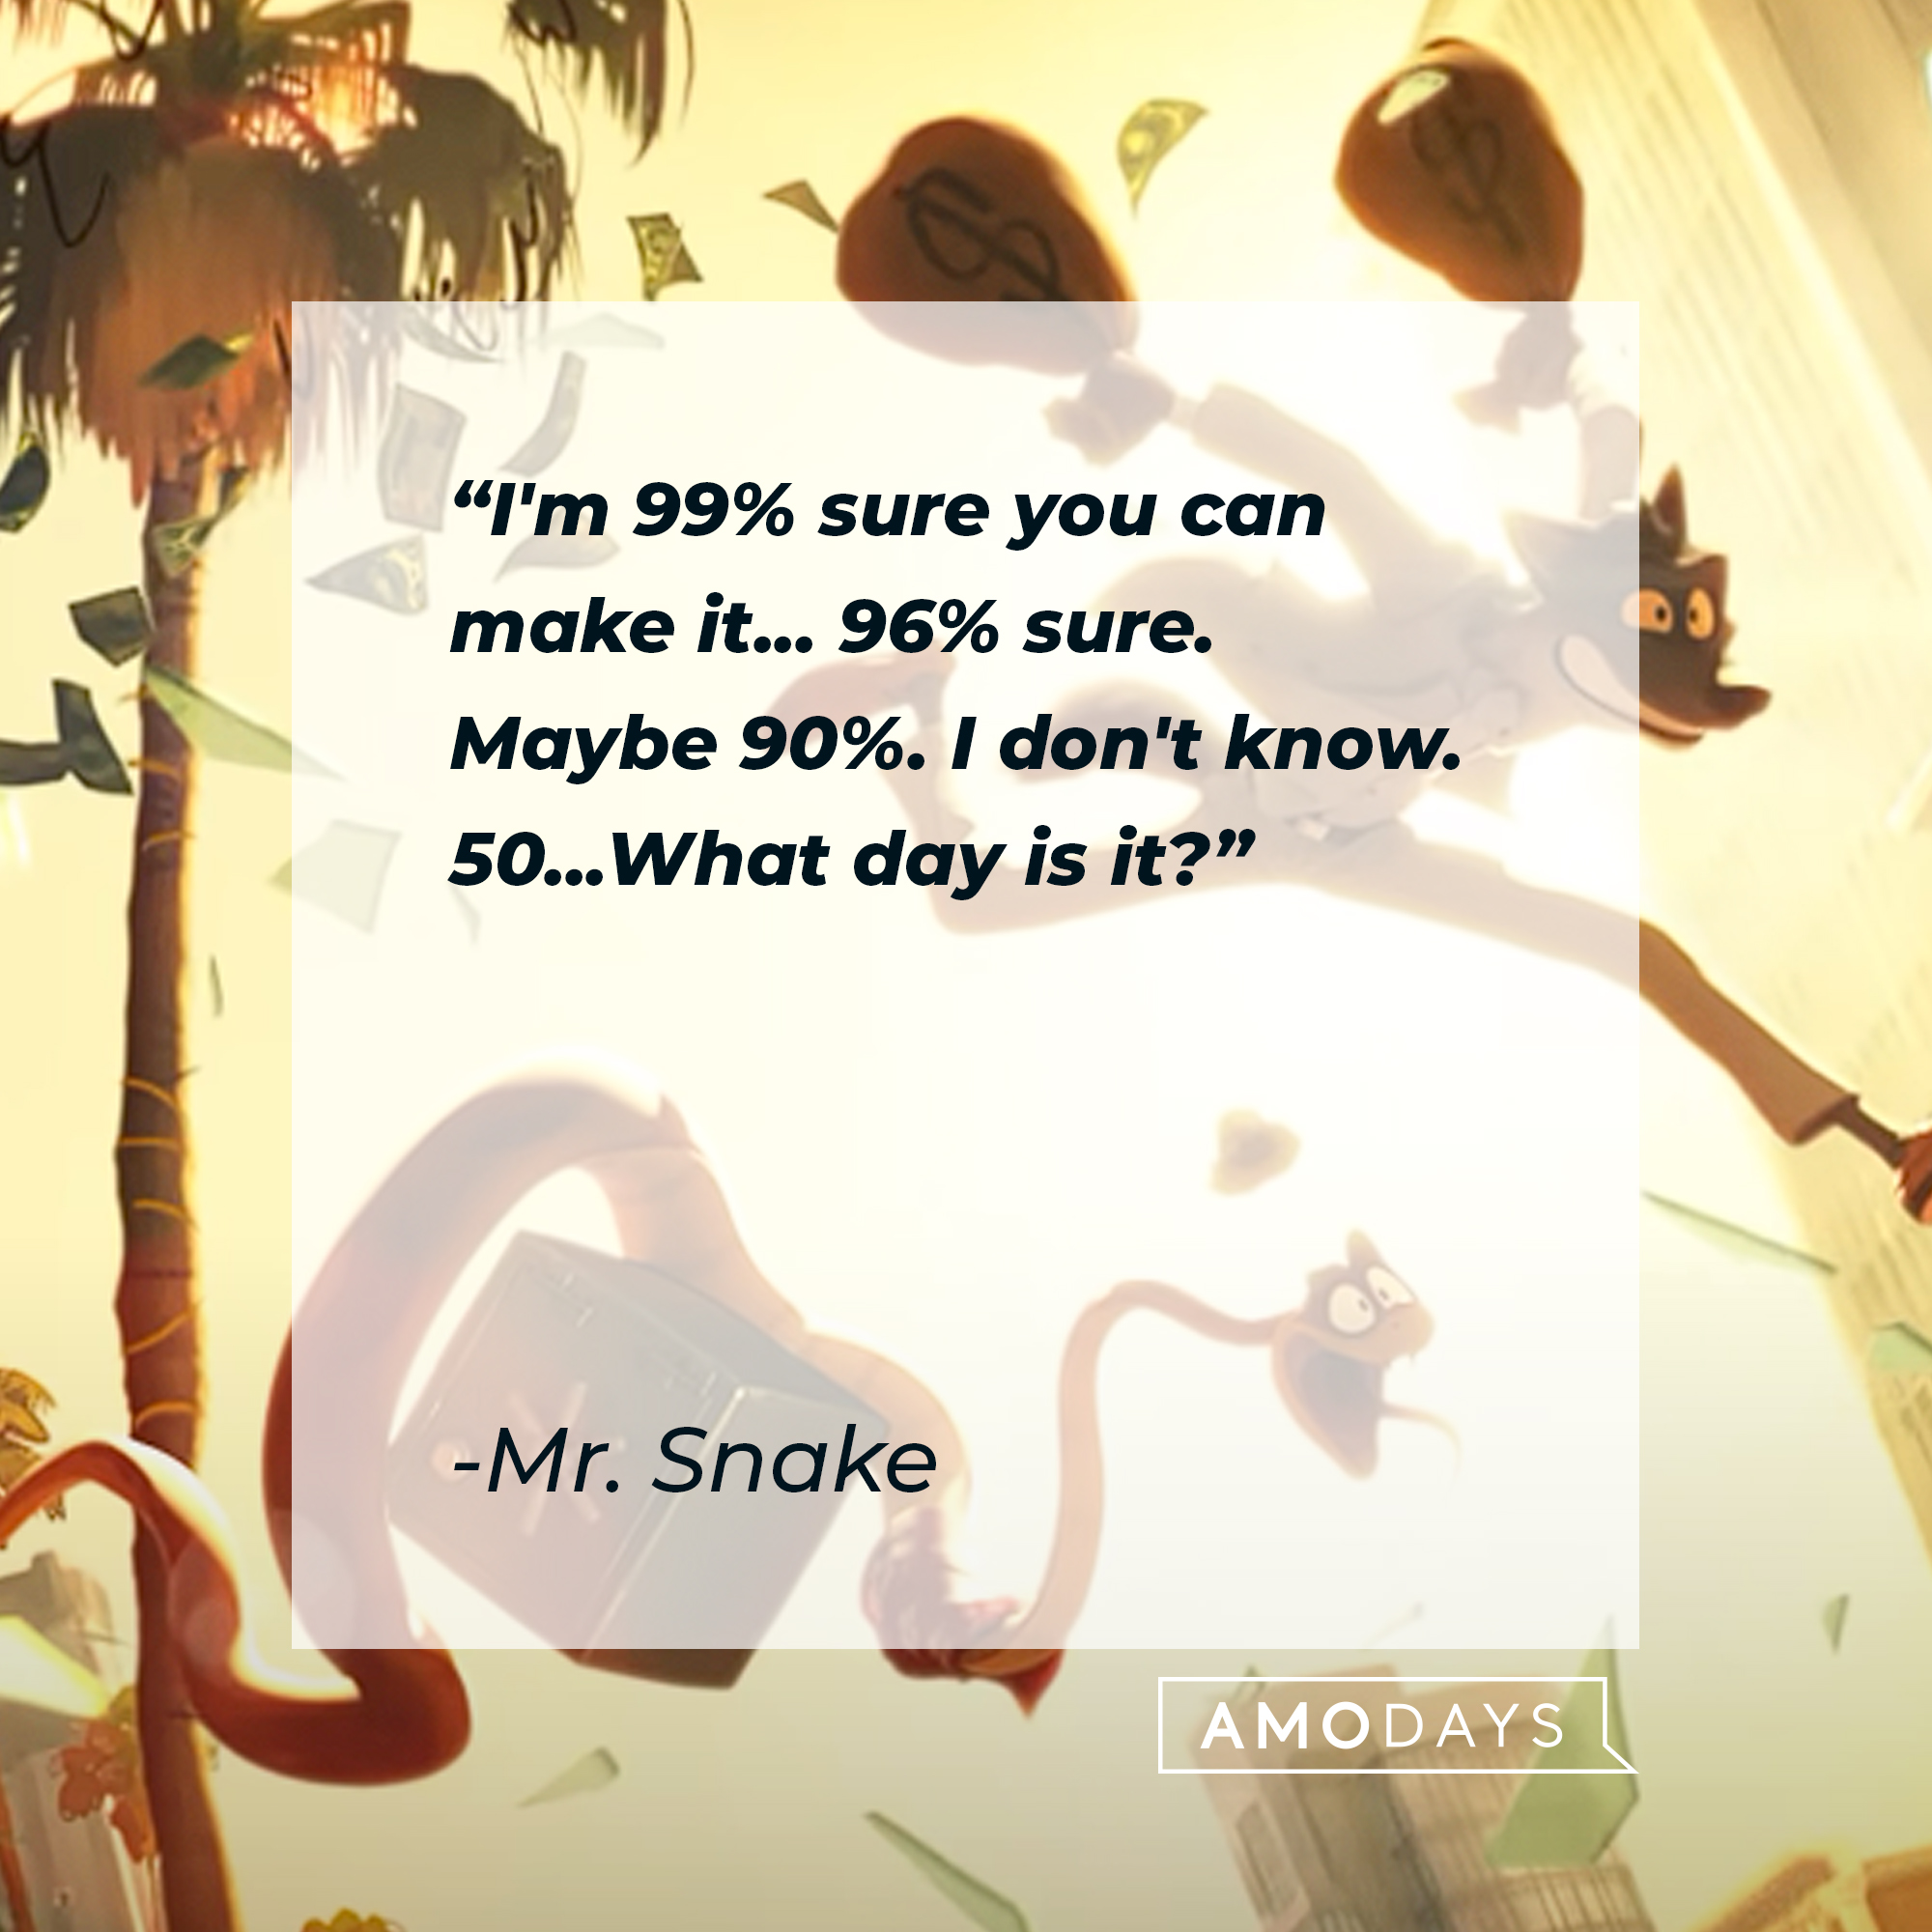 Mr. Snake's quote: "I'm 99% sure you can make it... 96% sure. Maybe 90%. I don't know. 50...What day is it?" | Source: youtube.com/UniversalPictures